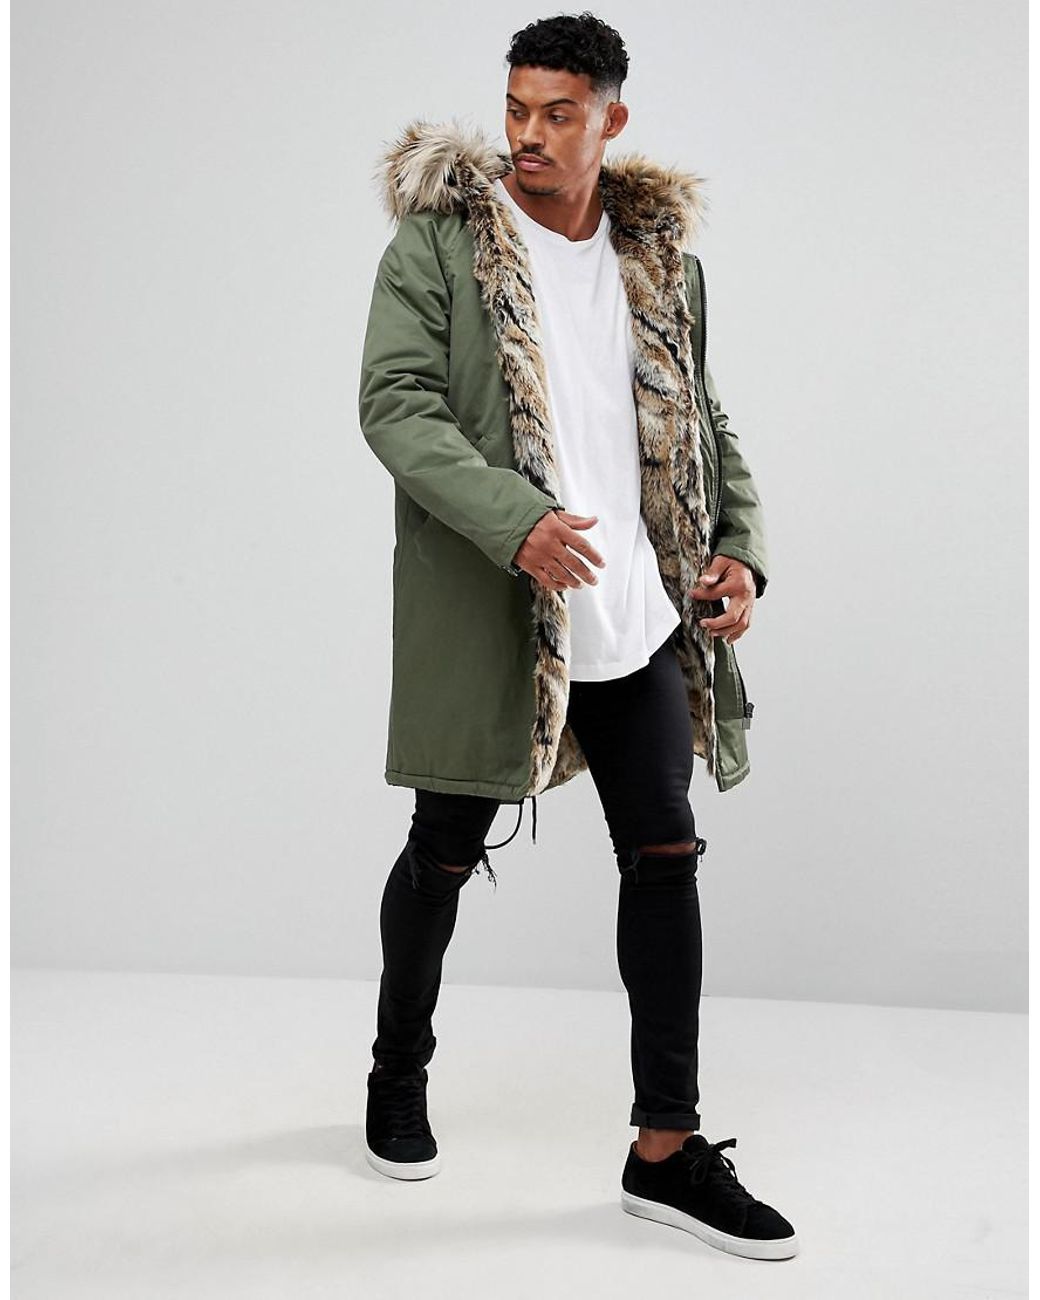 River Island Parka Jacket With Faux Fur Lining In Khaki in Green for Men